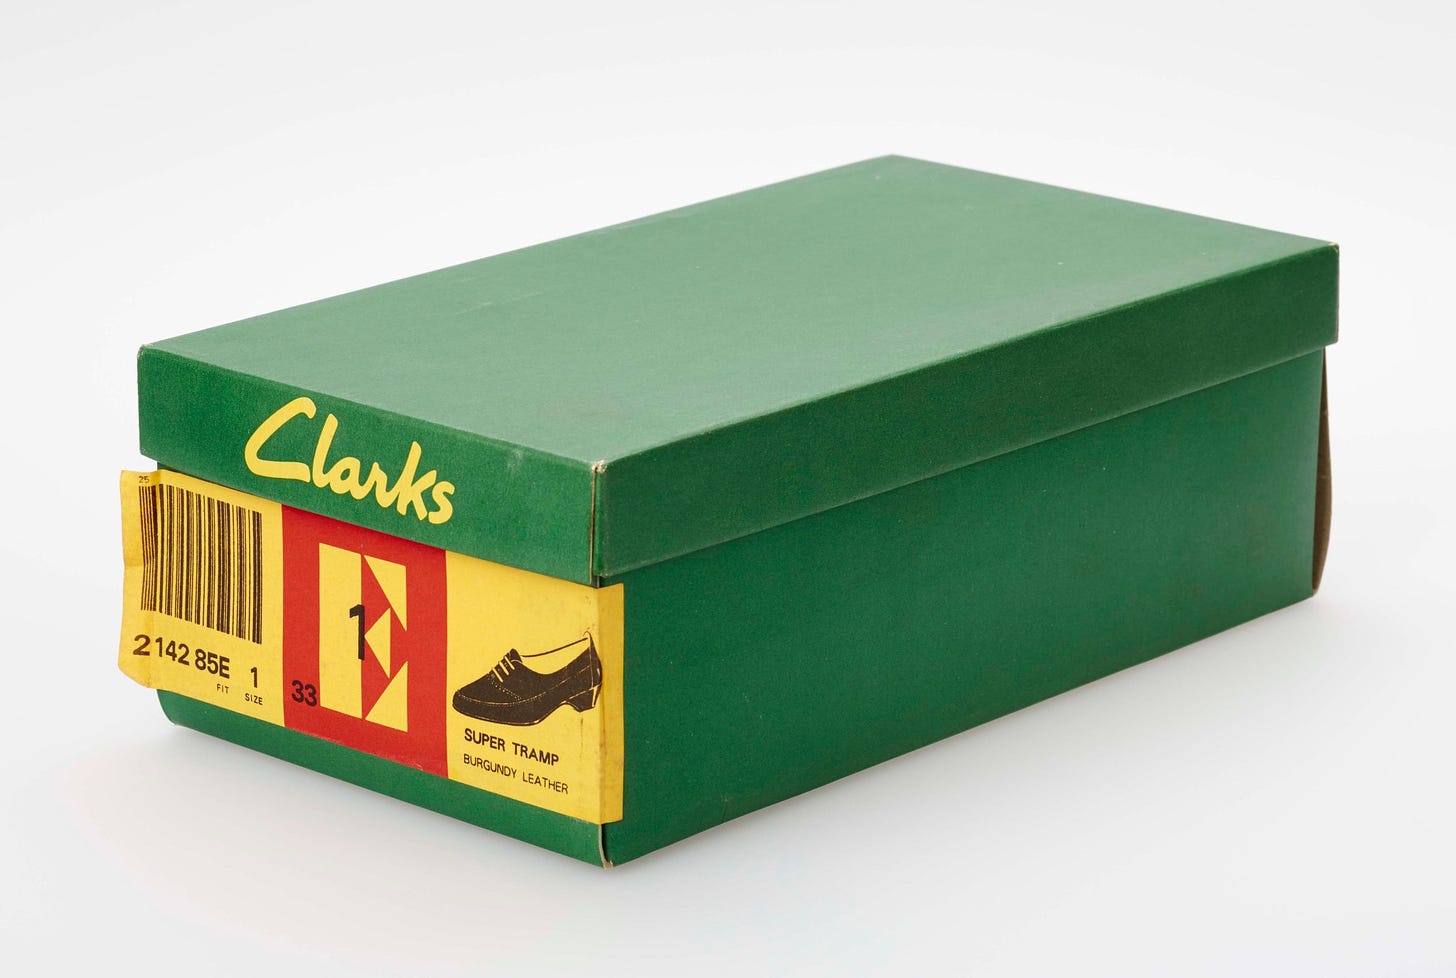 Alfred Gillett Trust on Twitter: "There are thousands of shoe boxes in our  store. This classic green shoe box was introduced during the 1970s by # Clarks to compliment new stores, and products